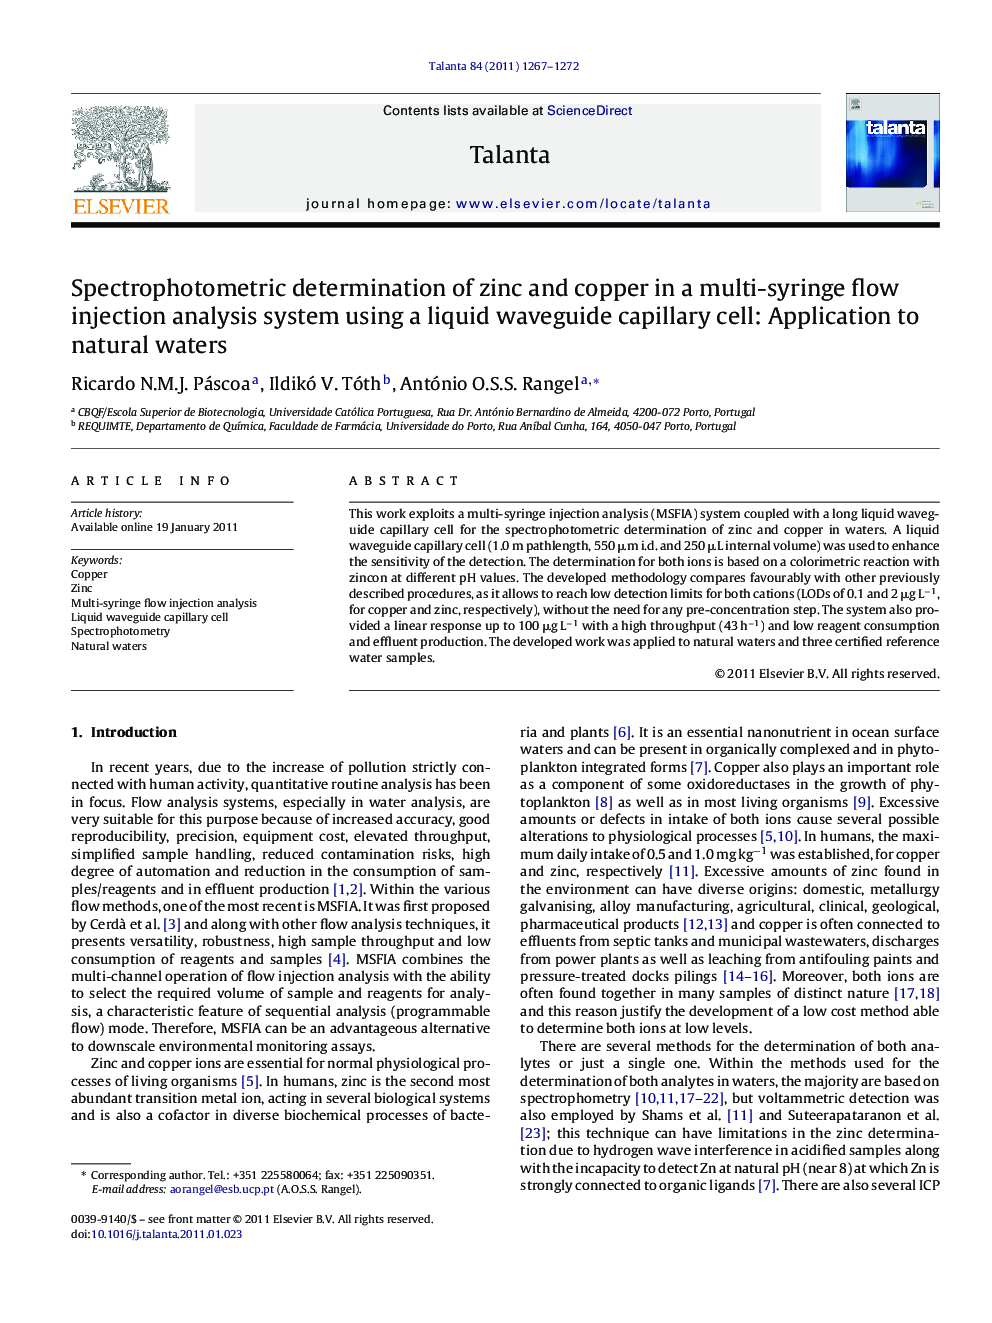 Spectrophotometric determination of zinc and copper in a multi-syringe flow injection analysis system using a liquid waveguide capillary cell: Application to natural waters